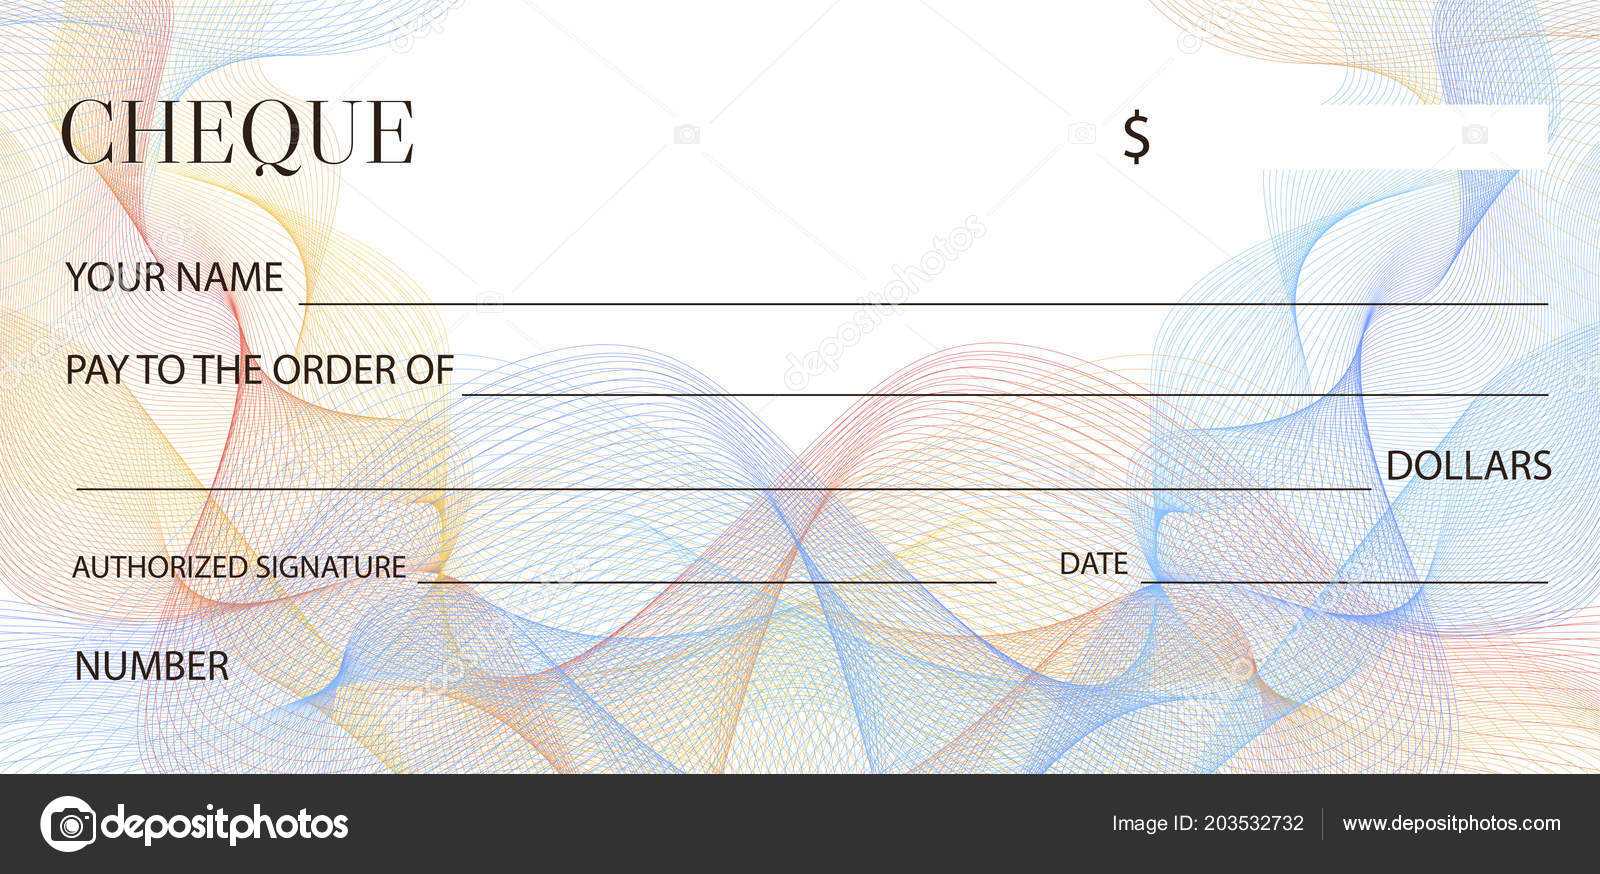 Cheque Check Template Chequebook Template Blank Bank Cheque Regarding Blank Business Check Template Word